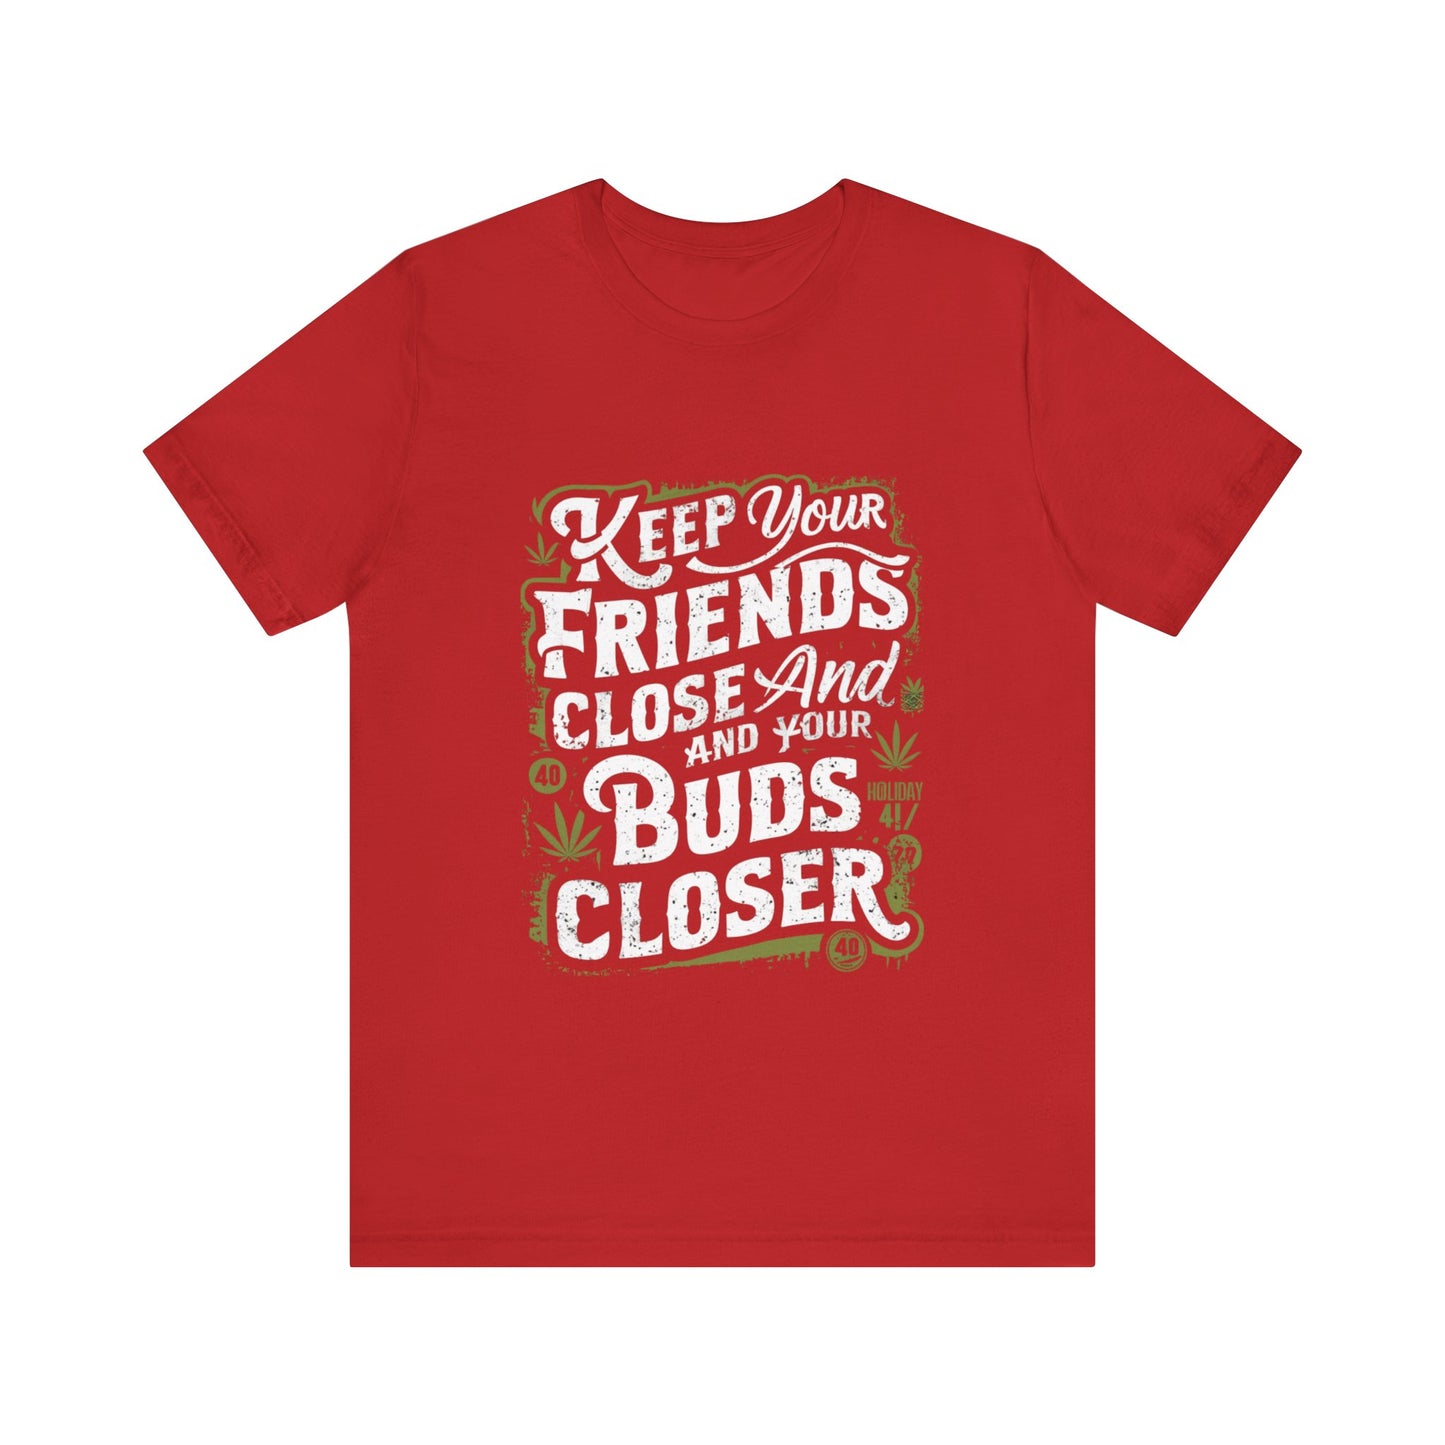 Keep Your Friends Close And Your Buds Closer Jersey Short Sleeve Tee For Men